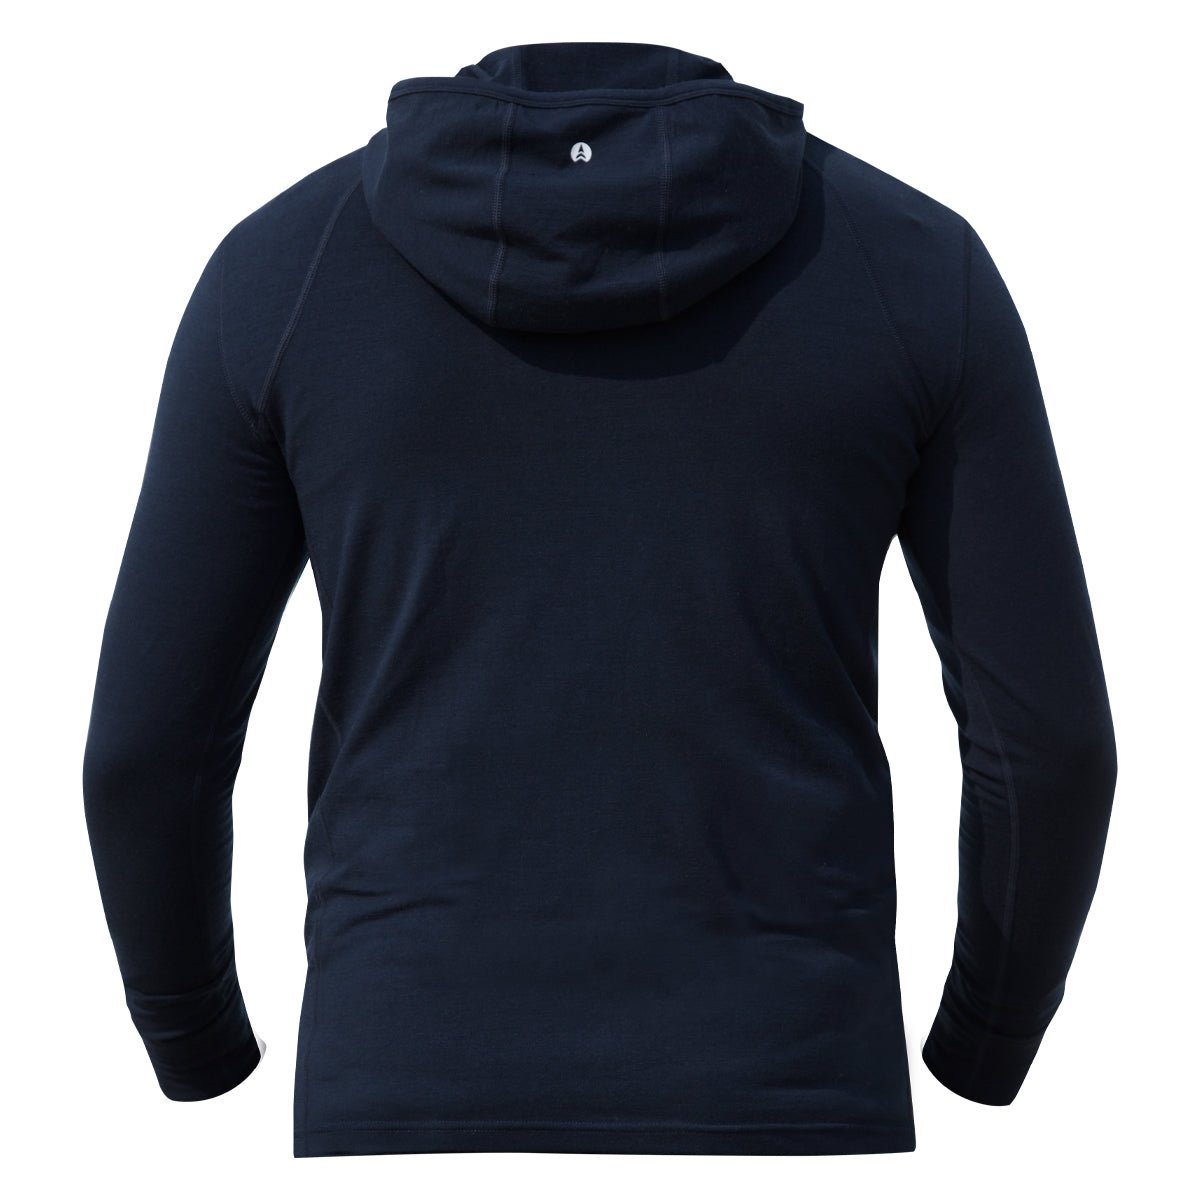 NorthWool Men's Merino Wool 1/4 Zip Midlayer Hoodie with Pouch and Pocket 260g - Woolove Apparel